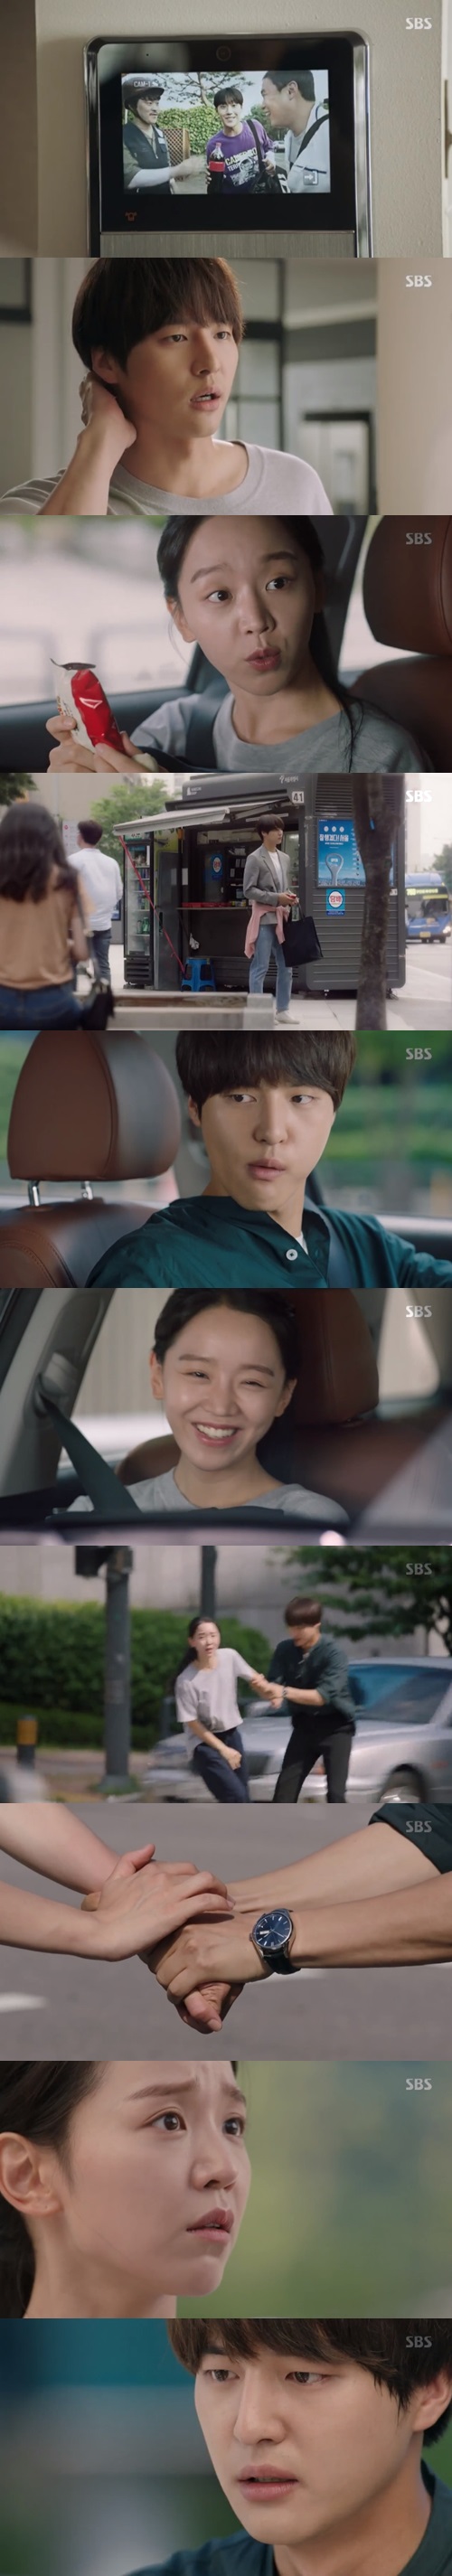 Yang Se-jong burst into softie inside charmOn the SBS monthly drama 30 July, Thirty but Seventeen 5-6 times (playplayed by Cho Sung-hee/directed assistant), Yang Se-jong considered Wu Seo-ri (Shin Hye-sun).Gong Woo-jin let Usuri stay in the stairwell for a month and then said, Please keep your promise to stay quiet and keep your promise.However, the distance was not only User, but also his nephew Yu Chan (Ahn Hyo-seop) and his friends broke down.First, Utheri made it impossible to say that he knew more about his dog Duckgu and his family condition than Gong Woojin.Deokgu ate better when he was with Utheri, and Utheri put the dying flower in the place of the place.Gong Woo-jin was impressed by the flowerpot that was revived while leaving the flowerpot as it was.Friends of Yu Chan Han Deok-soo (Cho Hyun-sik) and Dong-Hae Bum (Lee Do-hyun) did not care what kind of expression Gong Woo-jin had, and ordered the Way Home courier service and various delivery foods of Gong Woo-jin, making Gong Woo-jin troublesome.Gong was sweating and organizing the courier service, and daily life was difficult to receive the delivery food. Here, Han Duck-soo and Dong-Hae were constantly asking questions and recommending meals.Gong Woo-jin said, Why do they deliver our Way Home courier ... No, why do they deliver it here? But did not say a word in front of Han Duck-soo Dong-Hae.I soon noticed the good heart of such a good person.Utheri was excited about going to work as a temporary instructor for the violin infant class, and Gong Woo-jin unexpectedly received a cancellation notification call instead.Gong Woo-jin tried to leave a note to Usuri, but he forgot to receive a urgent call, and eventually informed Usuri of his cancellation.Utherly was a little bit tinged, and then said, Ive been crying a lot lately, but Im cool because Im out of it.Uthery also said, The Man from Nowhere, not so much, but a little bit of a nice person.It seems to be a good person to know even if it looks stiff. The Man from Nowhere and Do not interpret it at will.I just happened to get that call. Im not going to have to worry about it anymore.Yoo Gyeong-sang